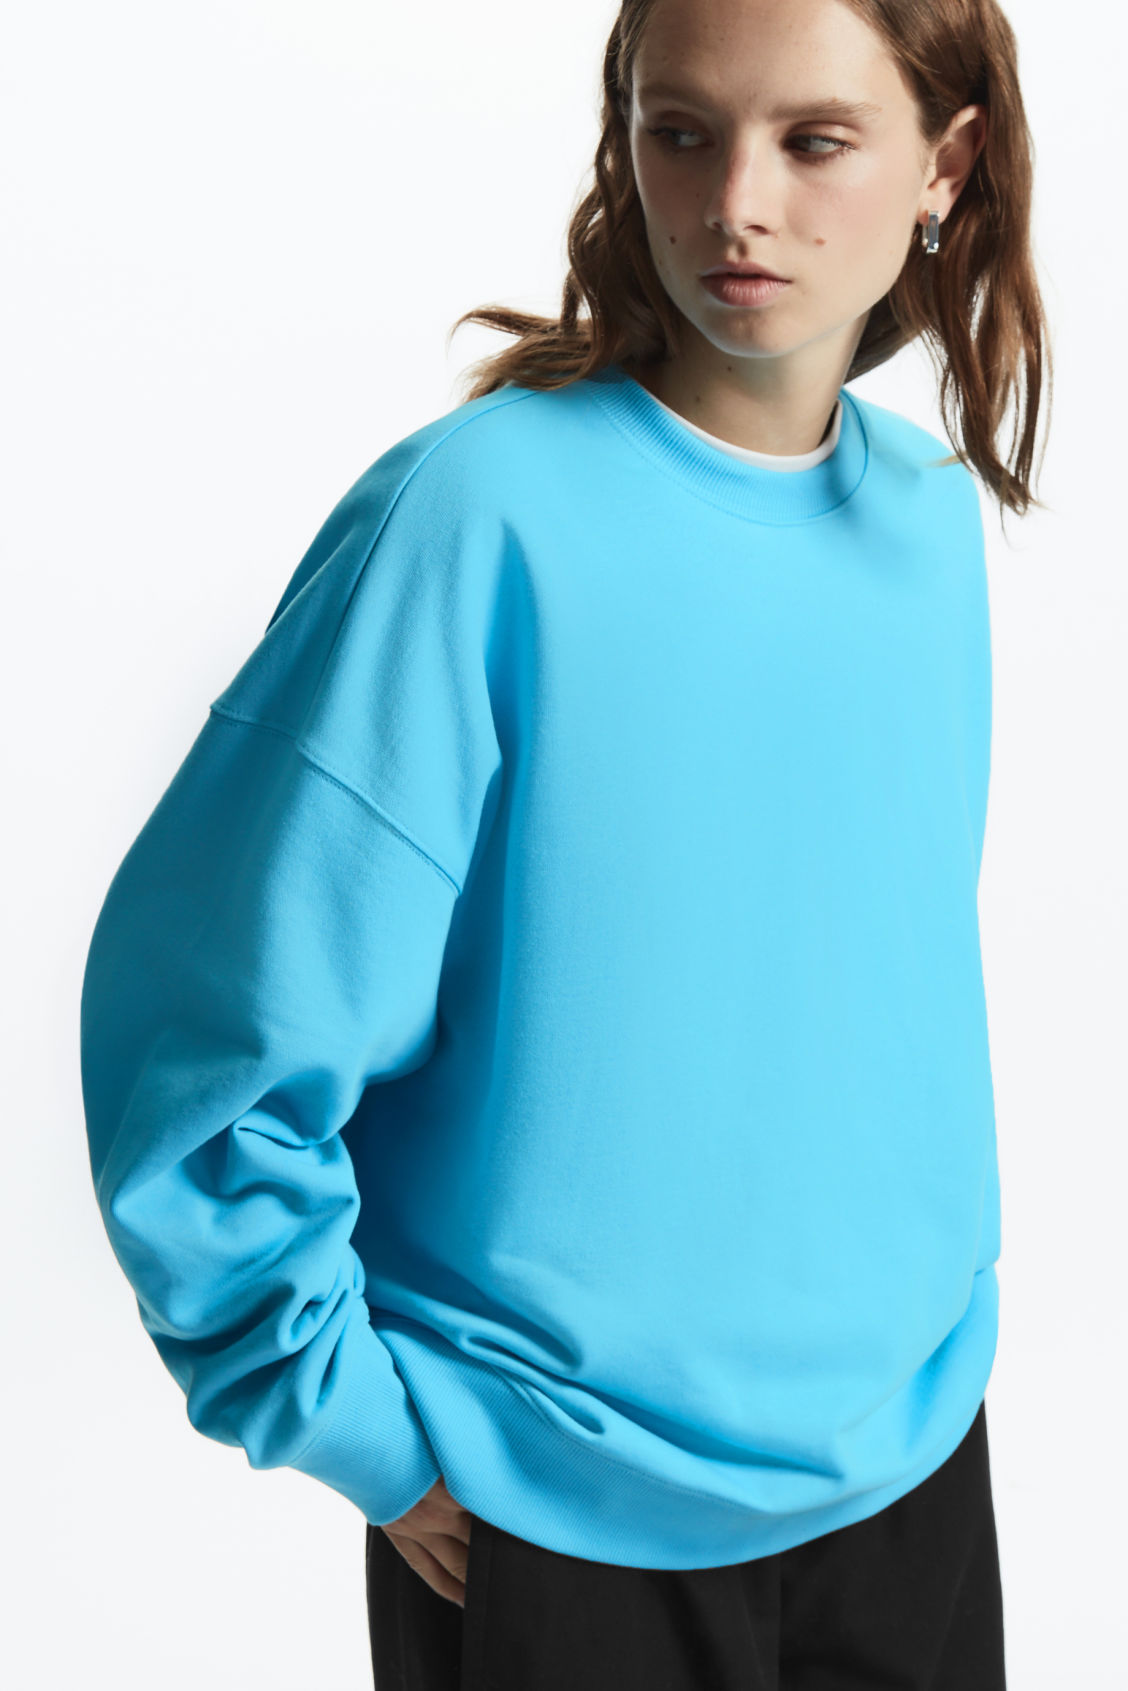 COS / RELAXED-FIT JERSEY SWEATSHIRT